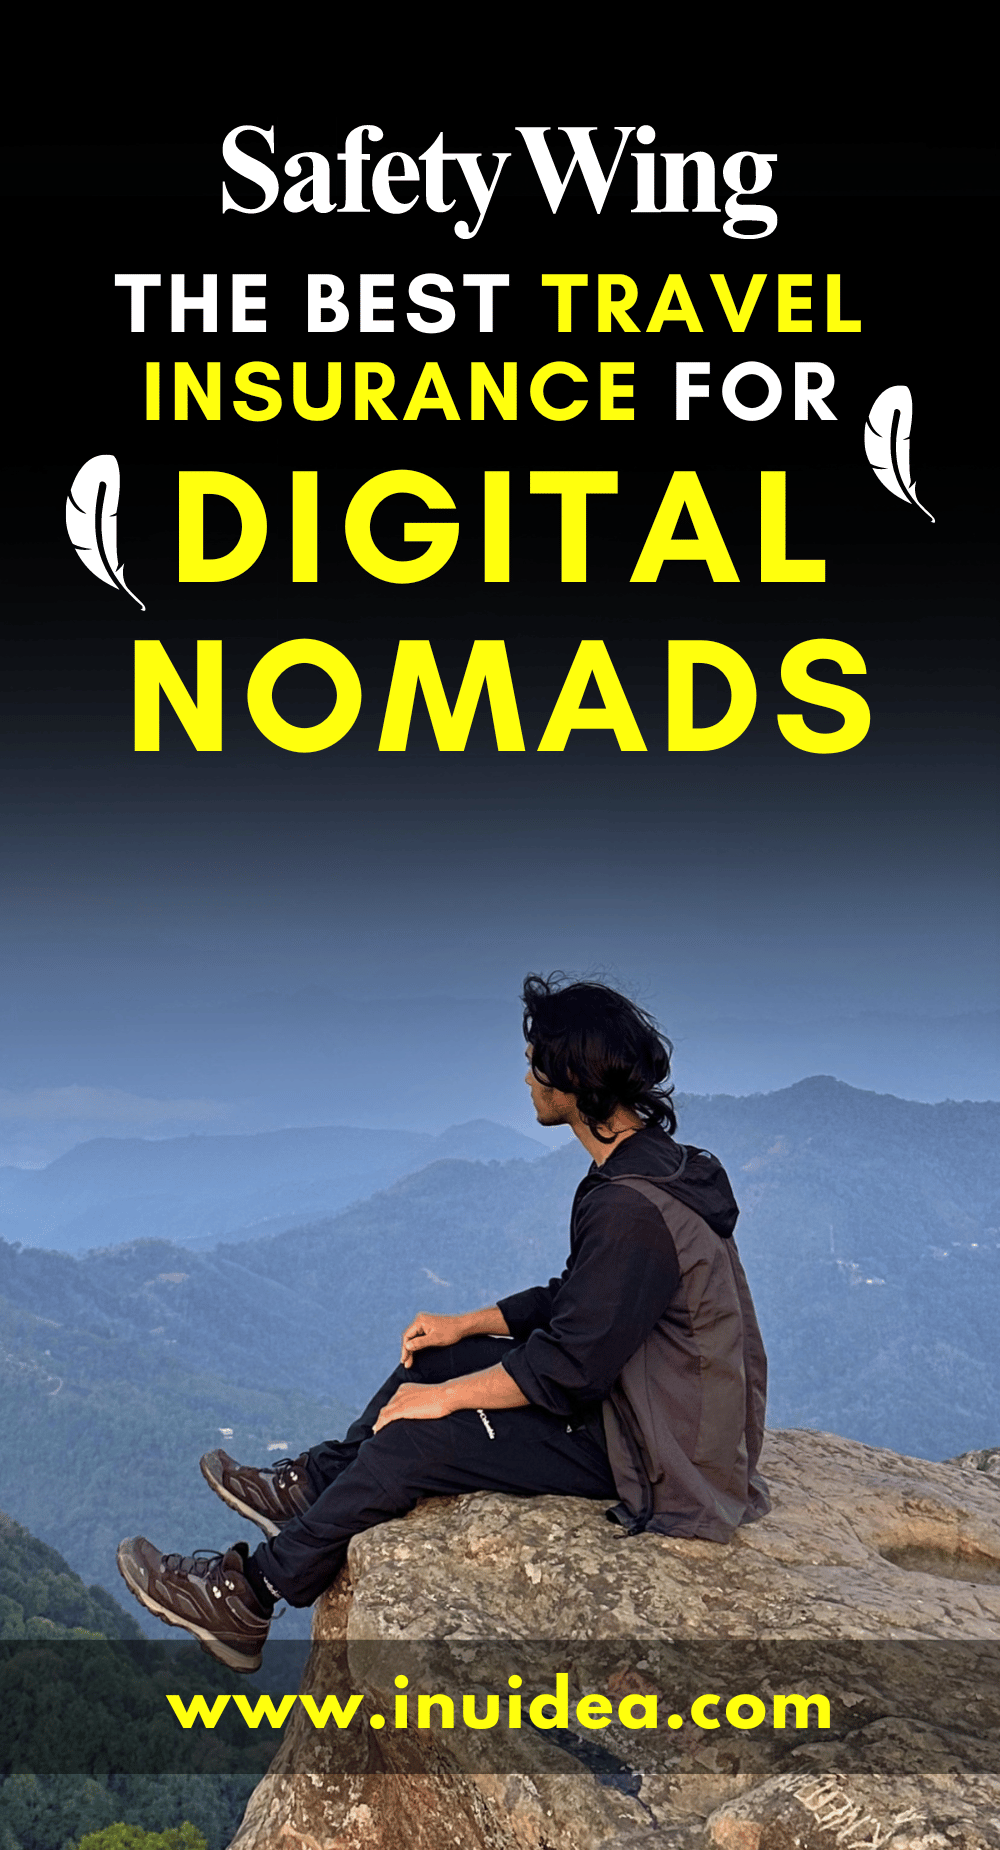 The best travel insurance for Digital Nomads — My honest review of SafetyWing